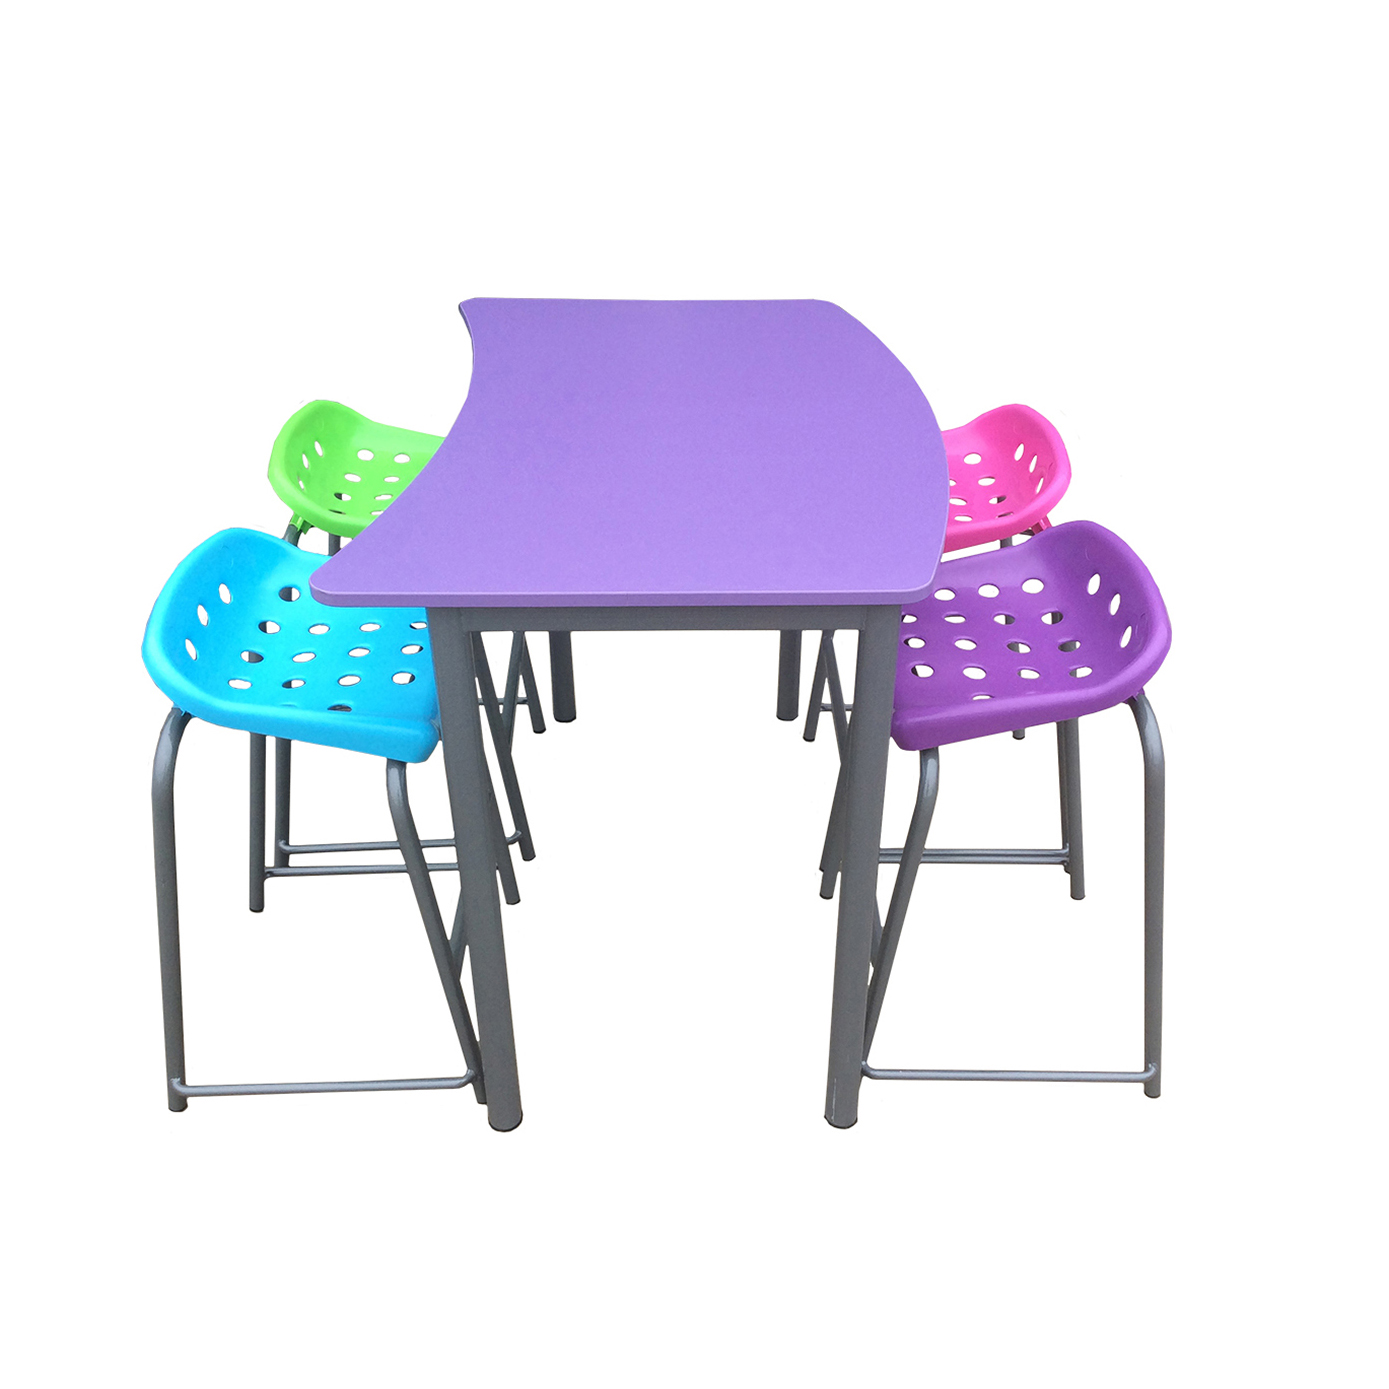 Educated furniture classroom tall table and pepper stools